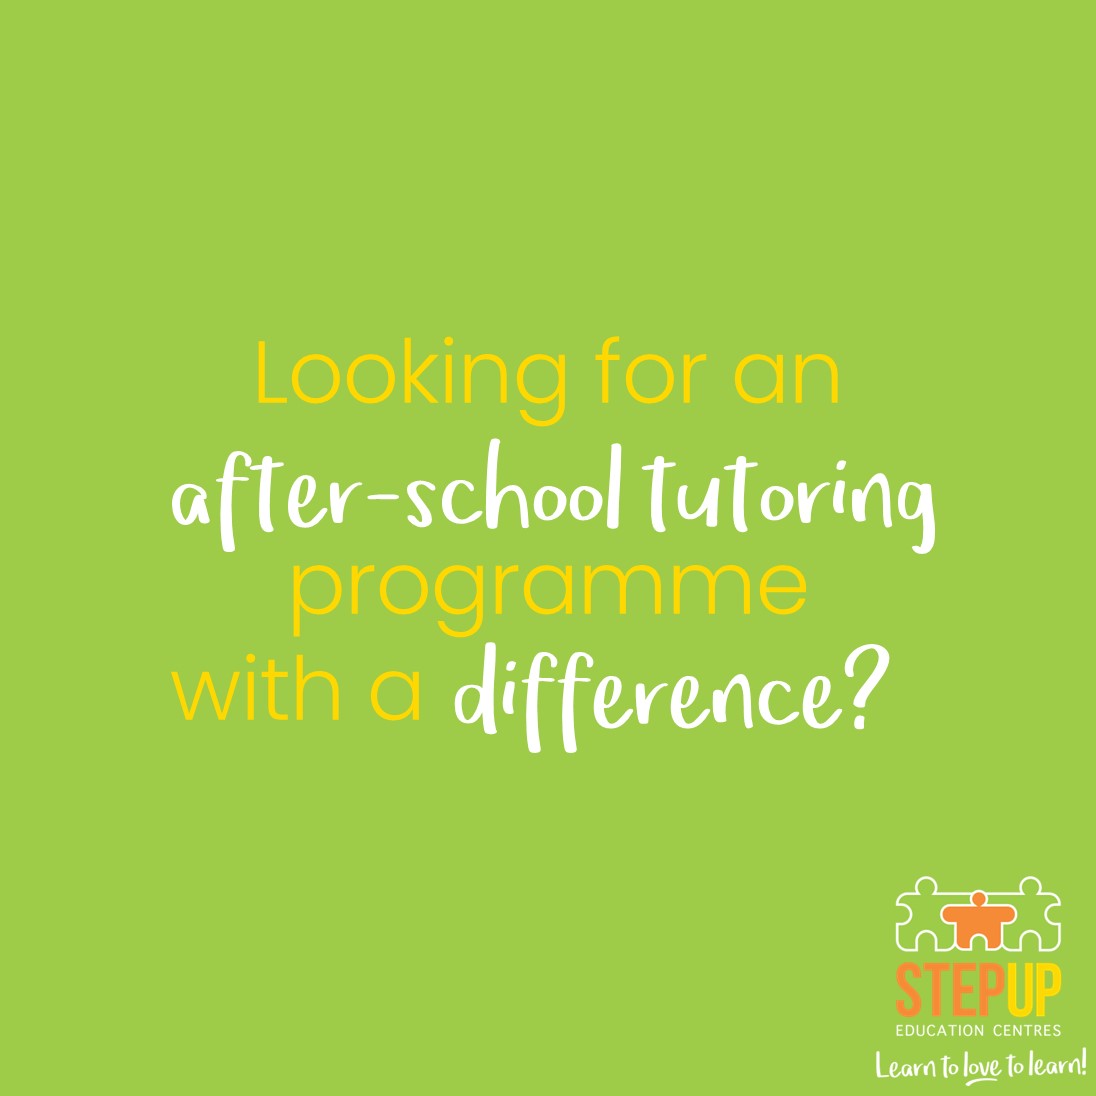 An After-School Tutoring Programme with a difference